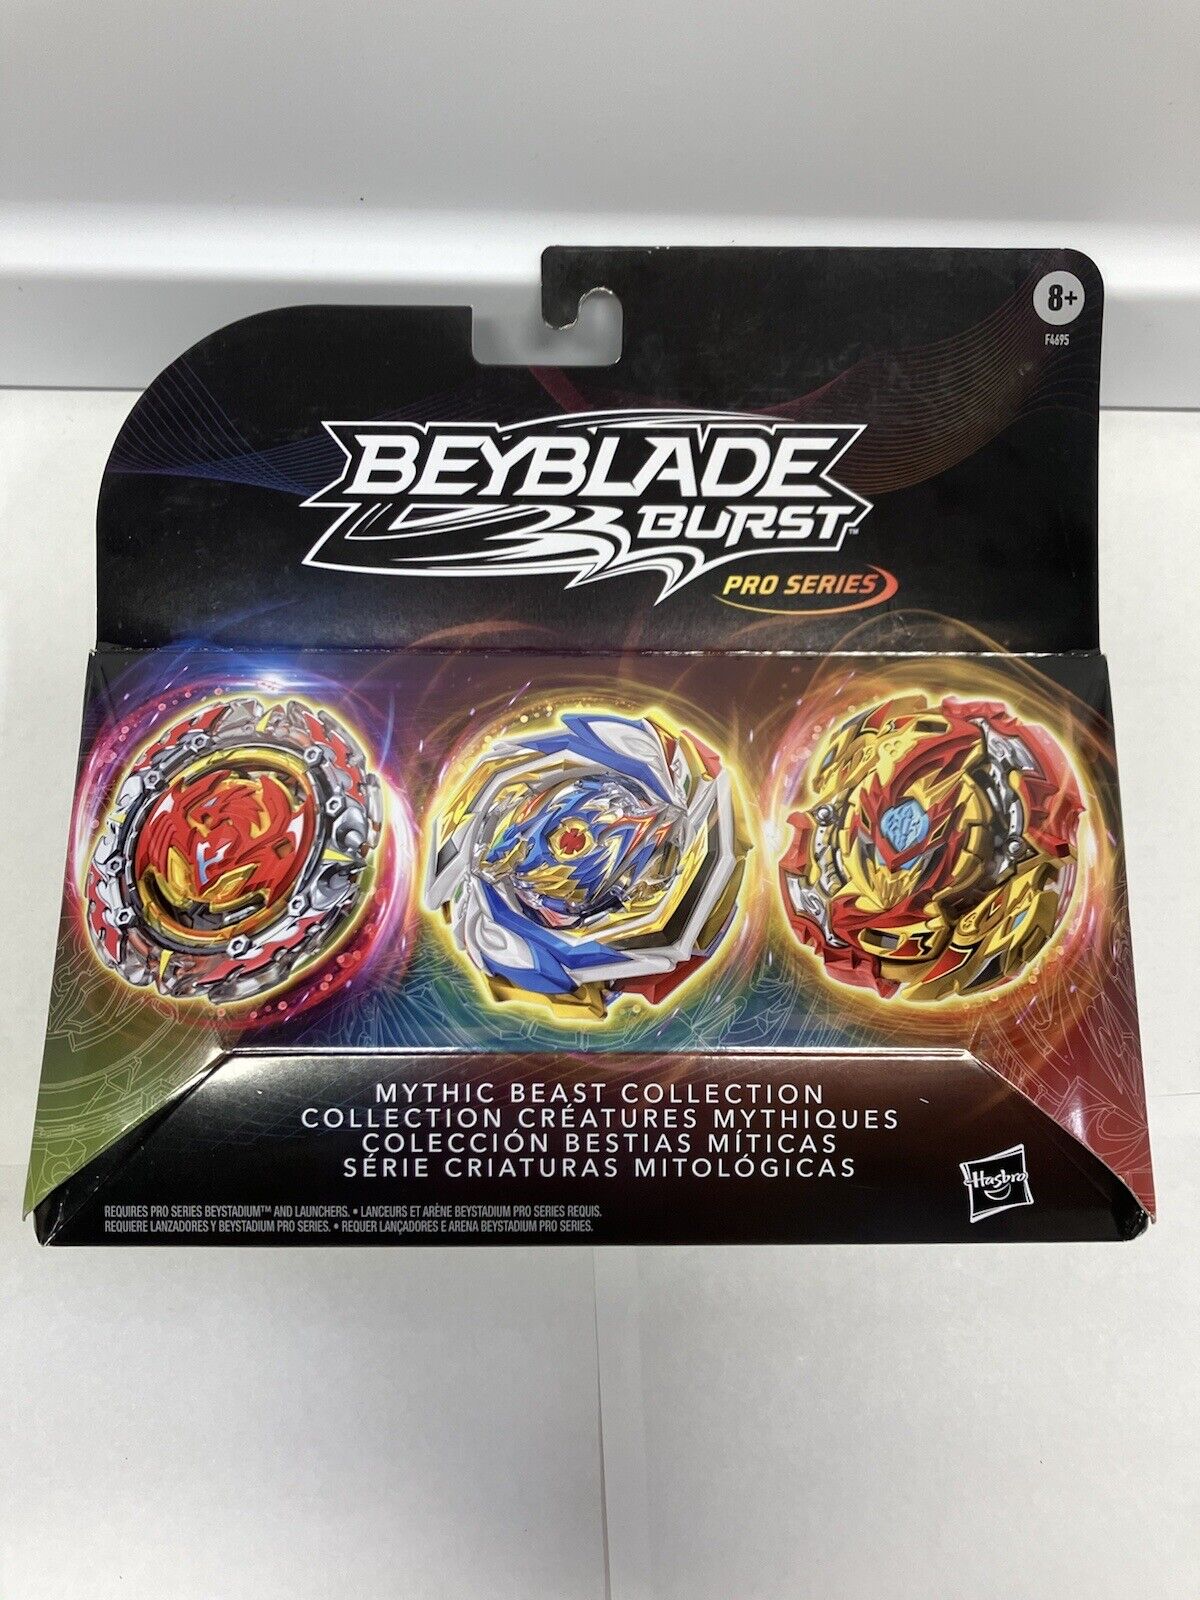 *New* Beyblades Burst Pro Series MYTHIC BEAST COLLECTION COLLECTION Creatures Без бренда